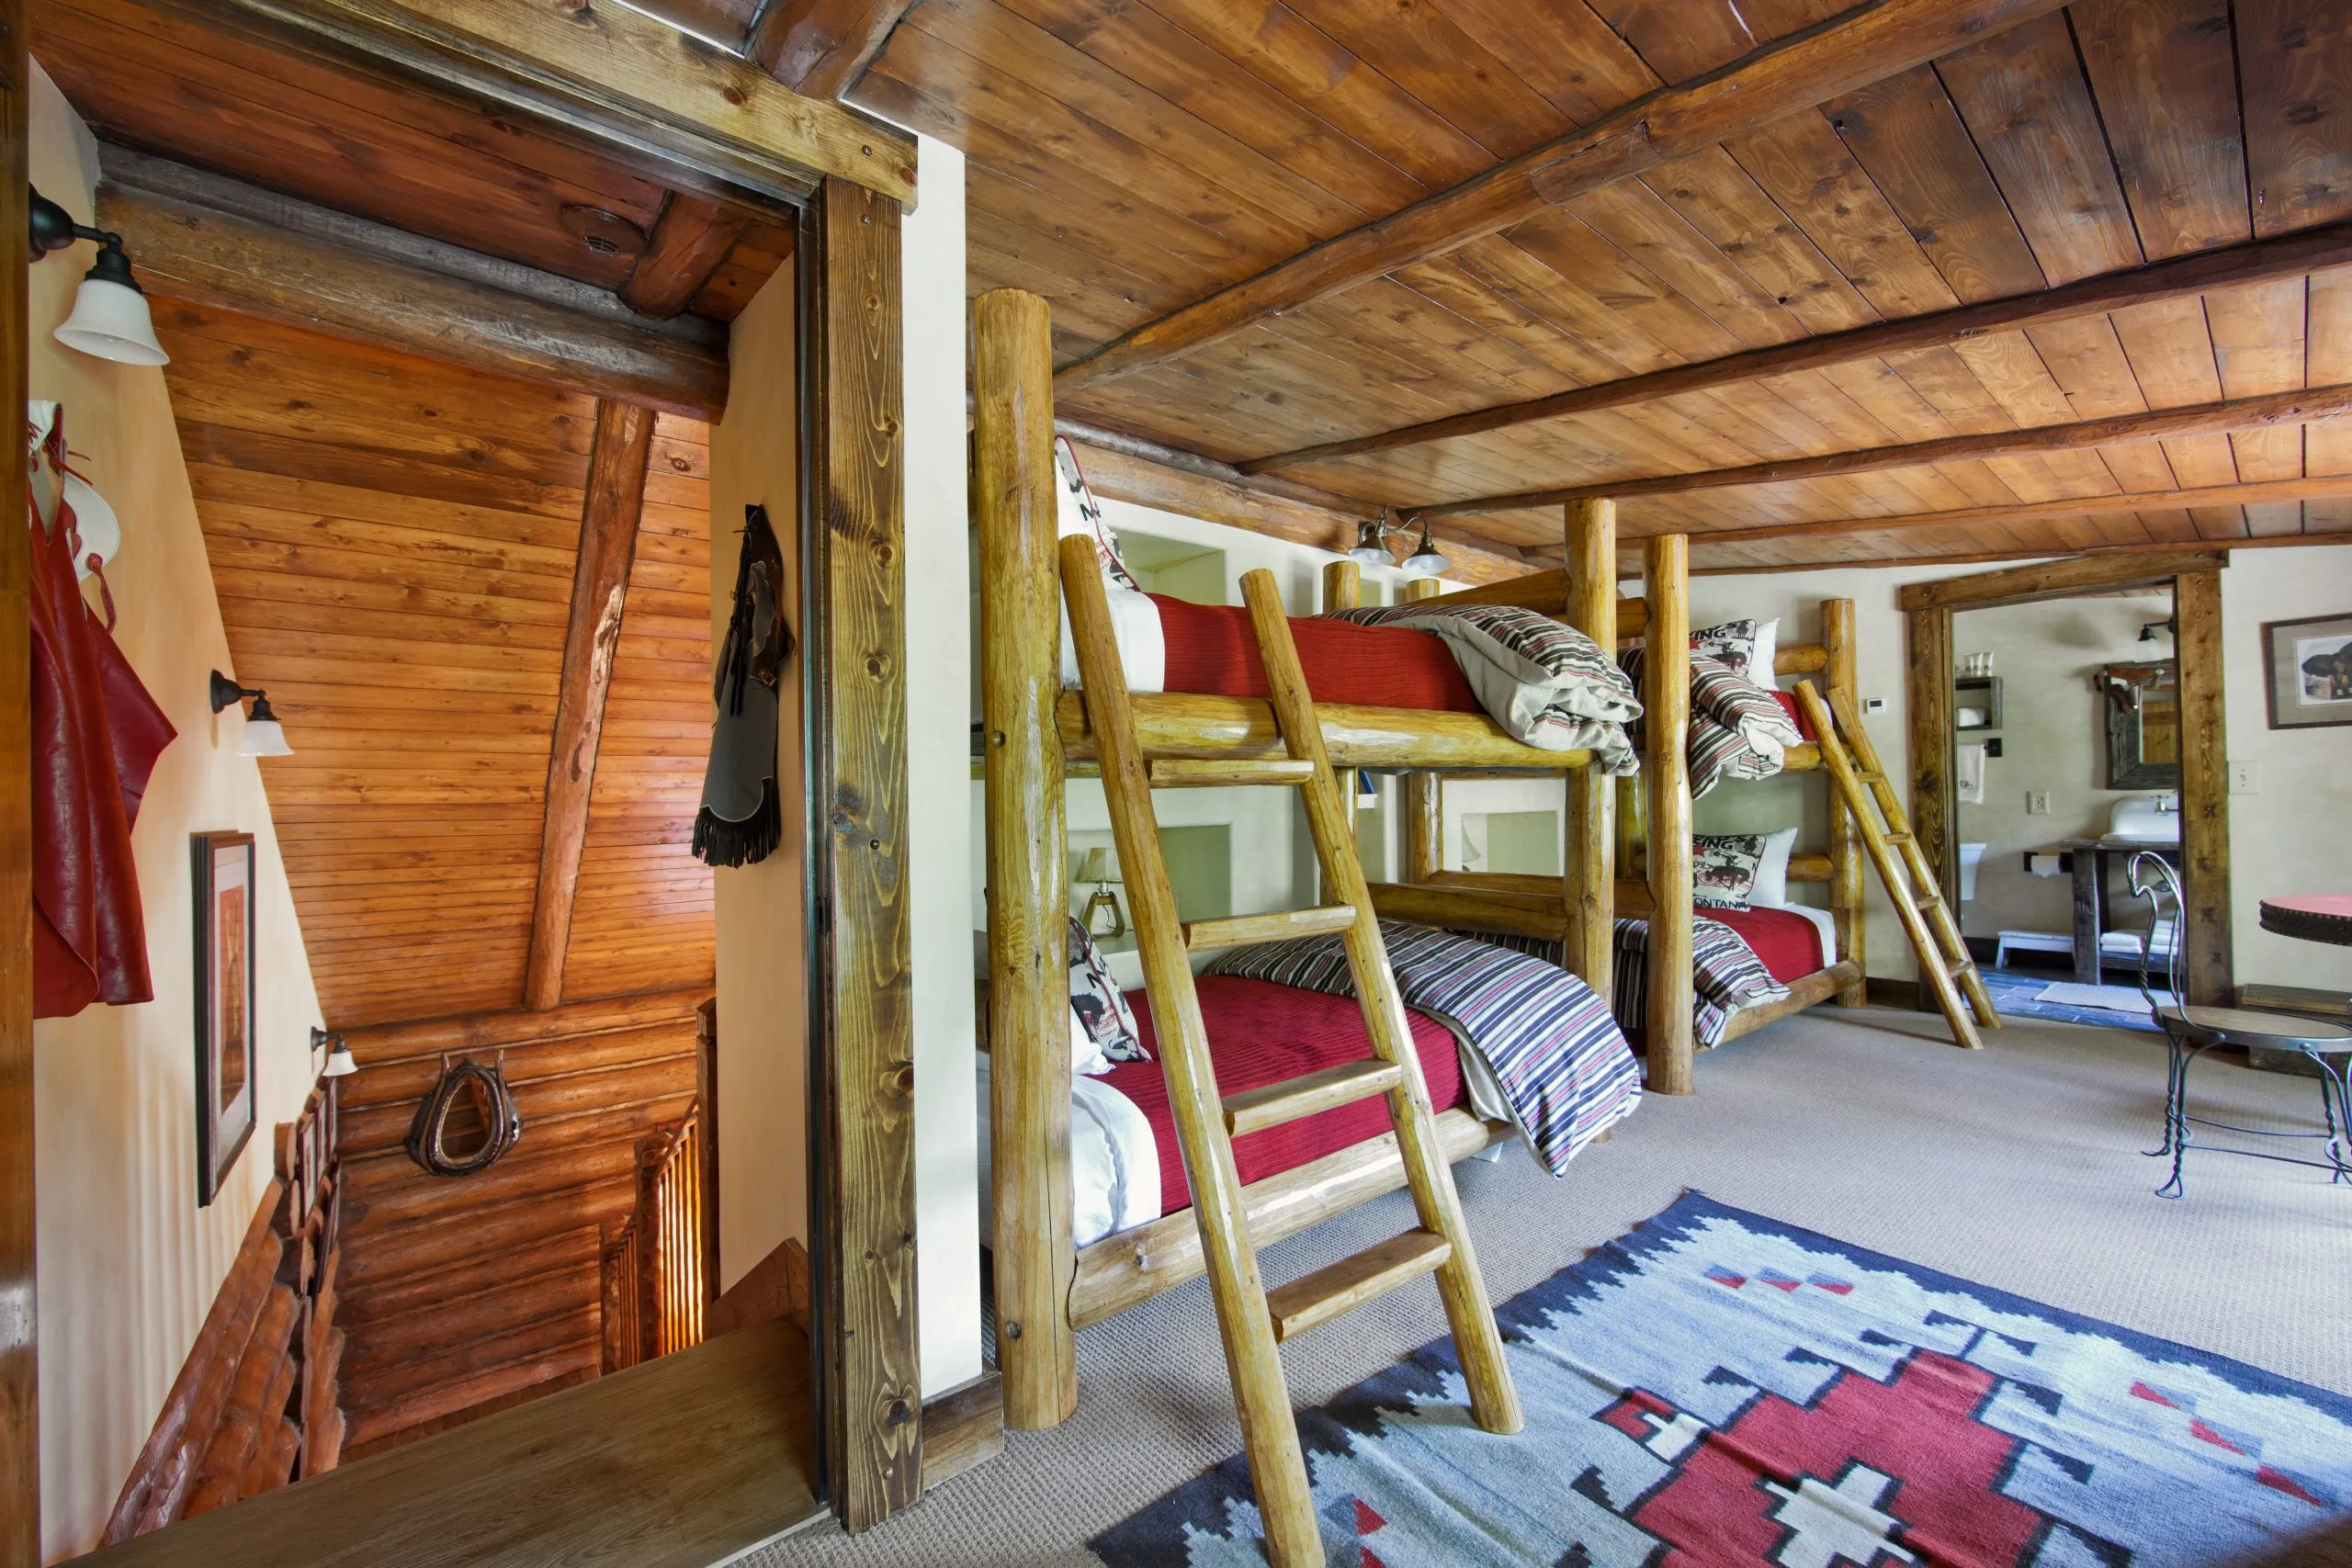 Two bunkbeds inside a cabin